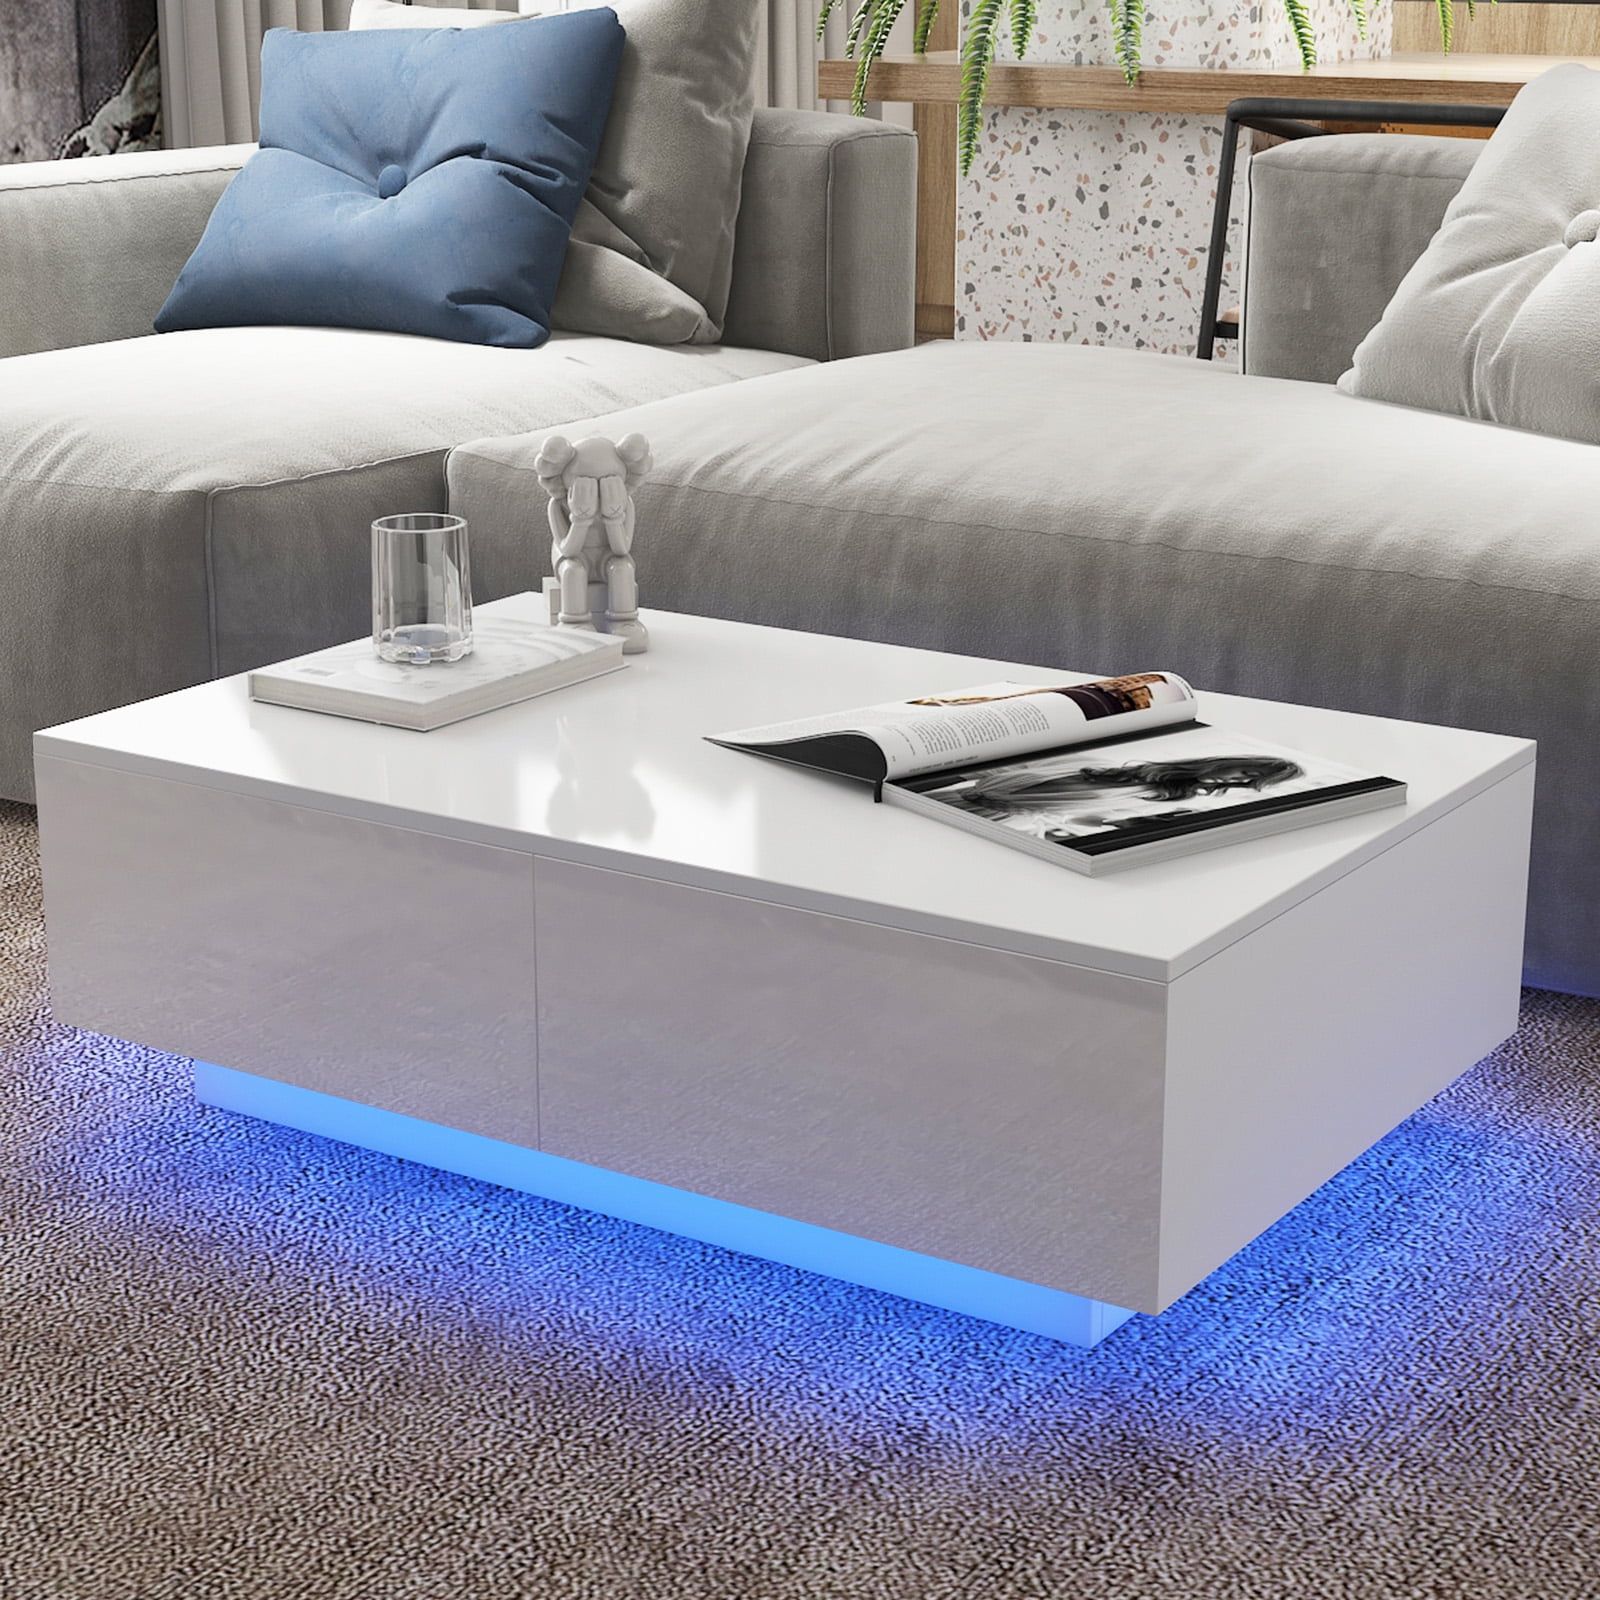 Hommpa Coffee Table With 4 Drawers Led Center Table Sofa Side Tea Tables  White High Gloss Finish – Walmart With Regard To Led Coffee Tables With 4 Drawers (Photo 1 of 15)